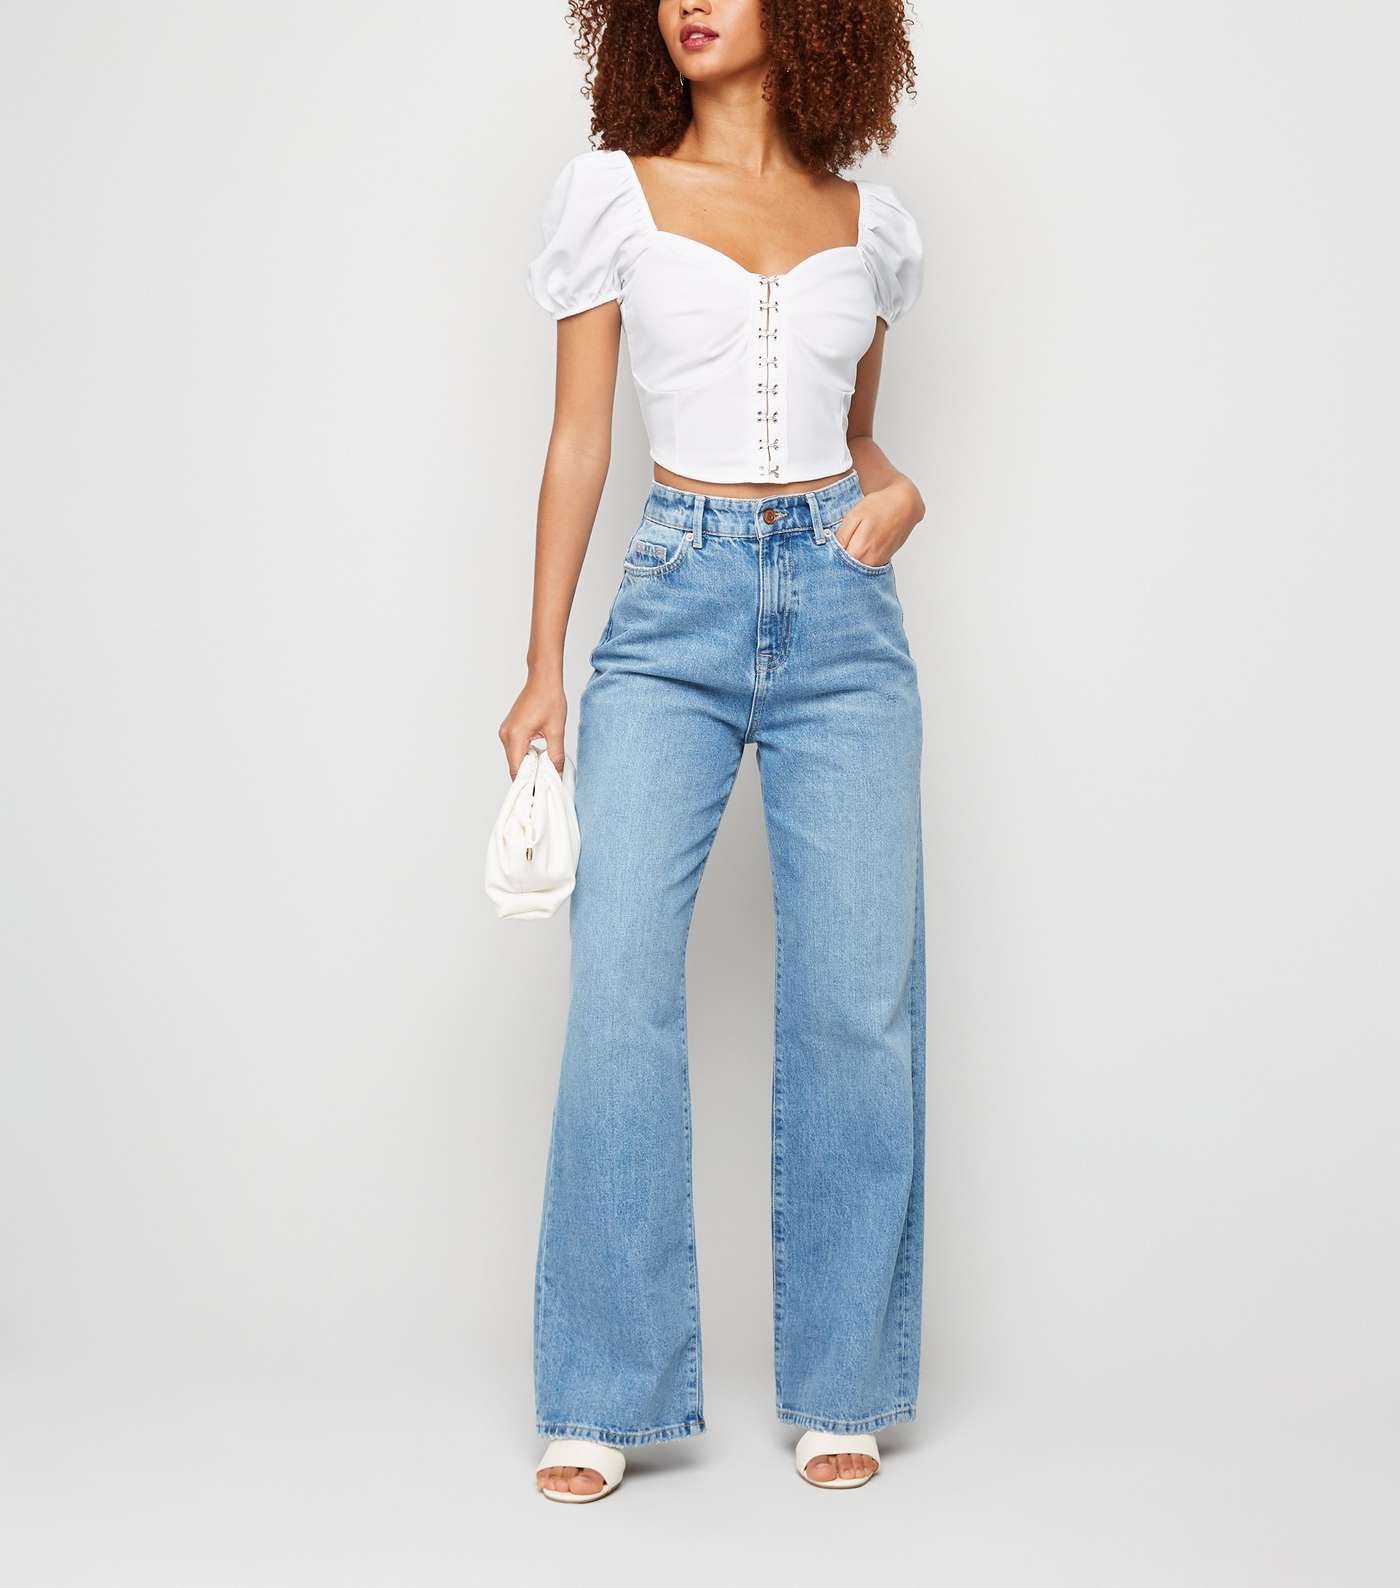 White Puff Sleeve Hook and Eye Crop Top Image 2